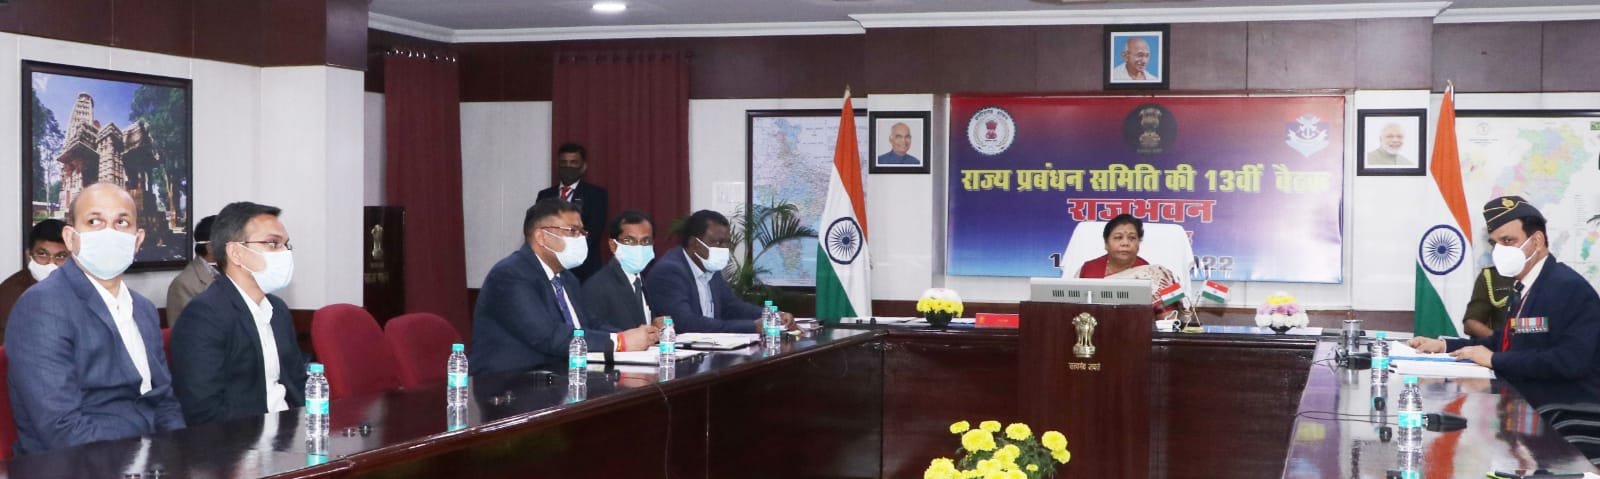 Chhattisgarh-collectors-and-Governor-meeting